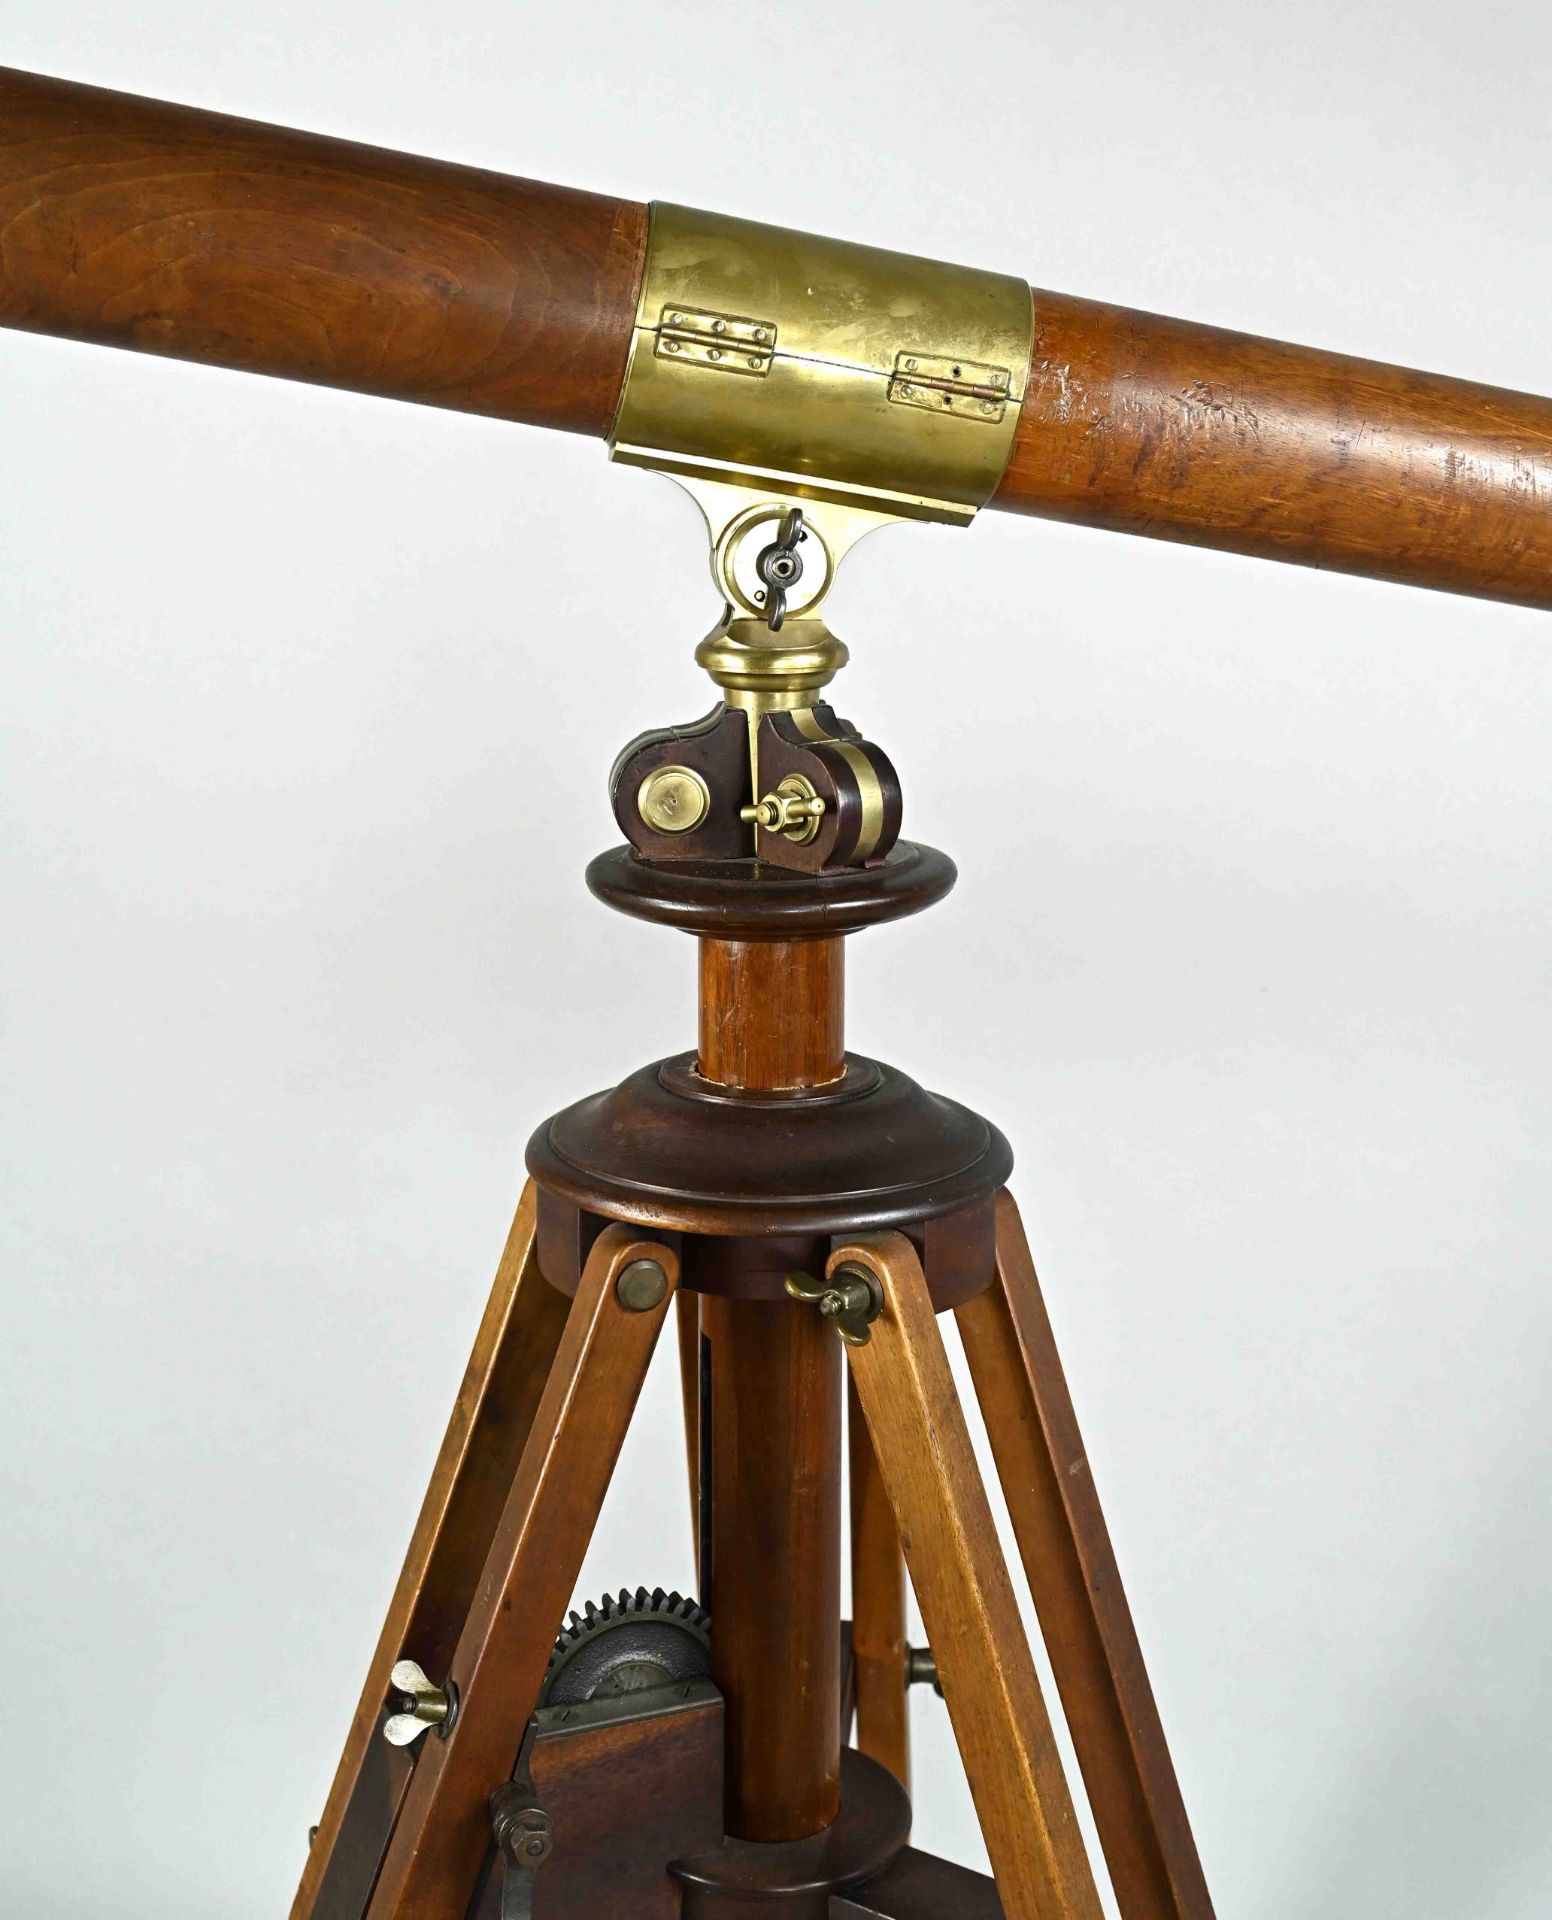 Large telescope on tripod, Germany, mid-19th century, Woerle & brothers von Ruedorffer, walnut and  - Image 3 of 5